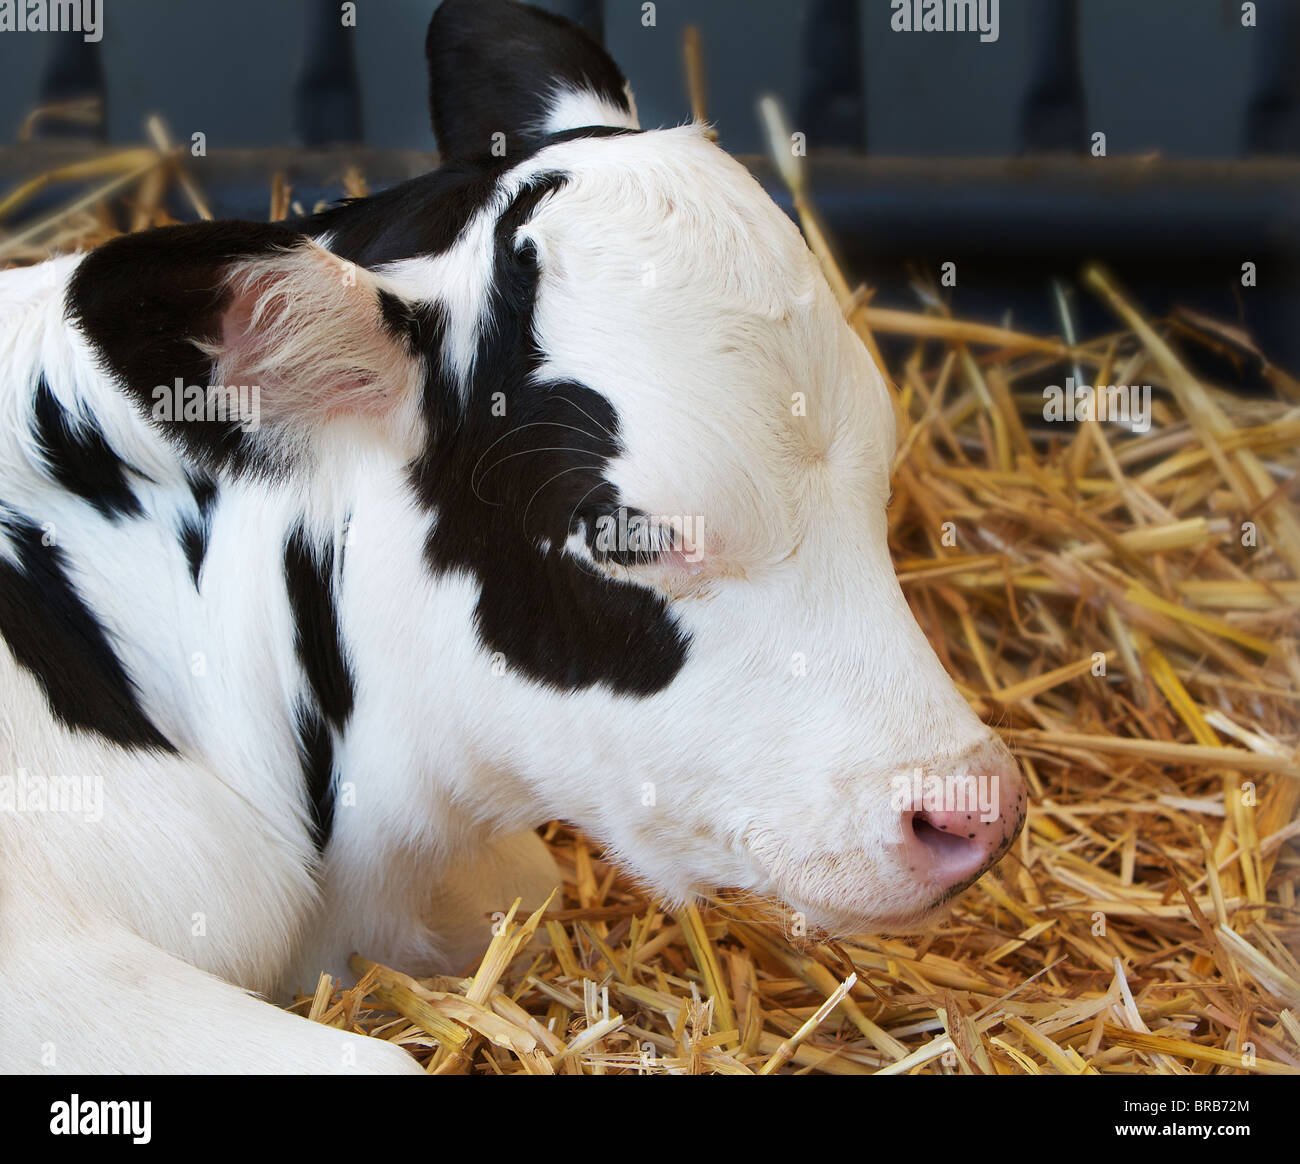 Black and white spotted young cow calf in hay Stock Photo